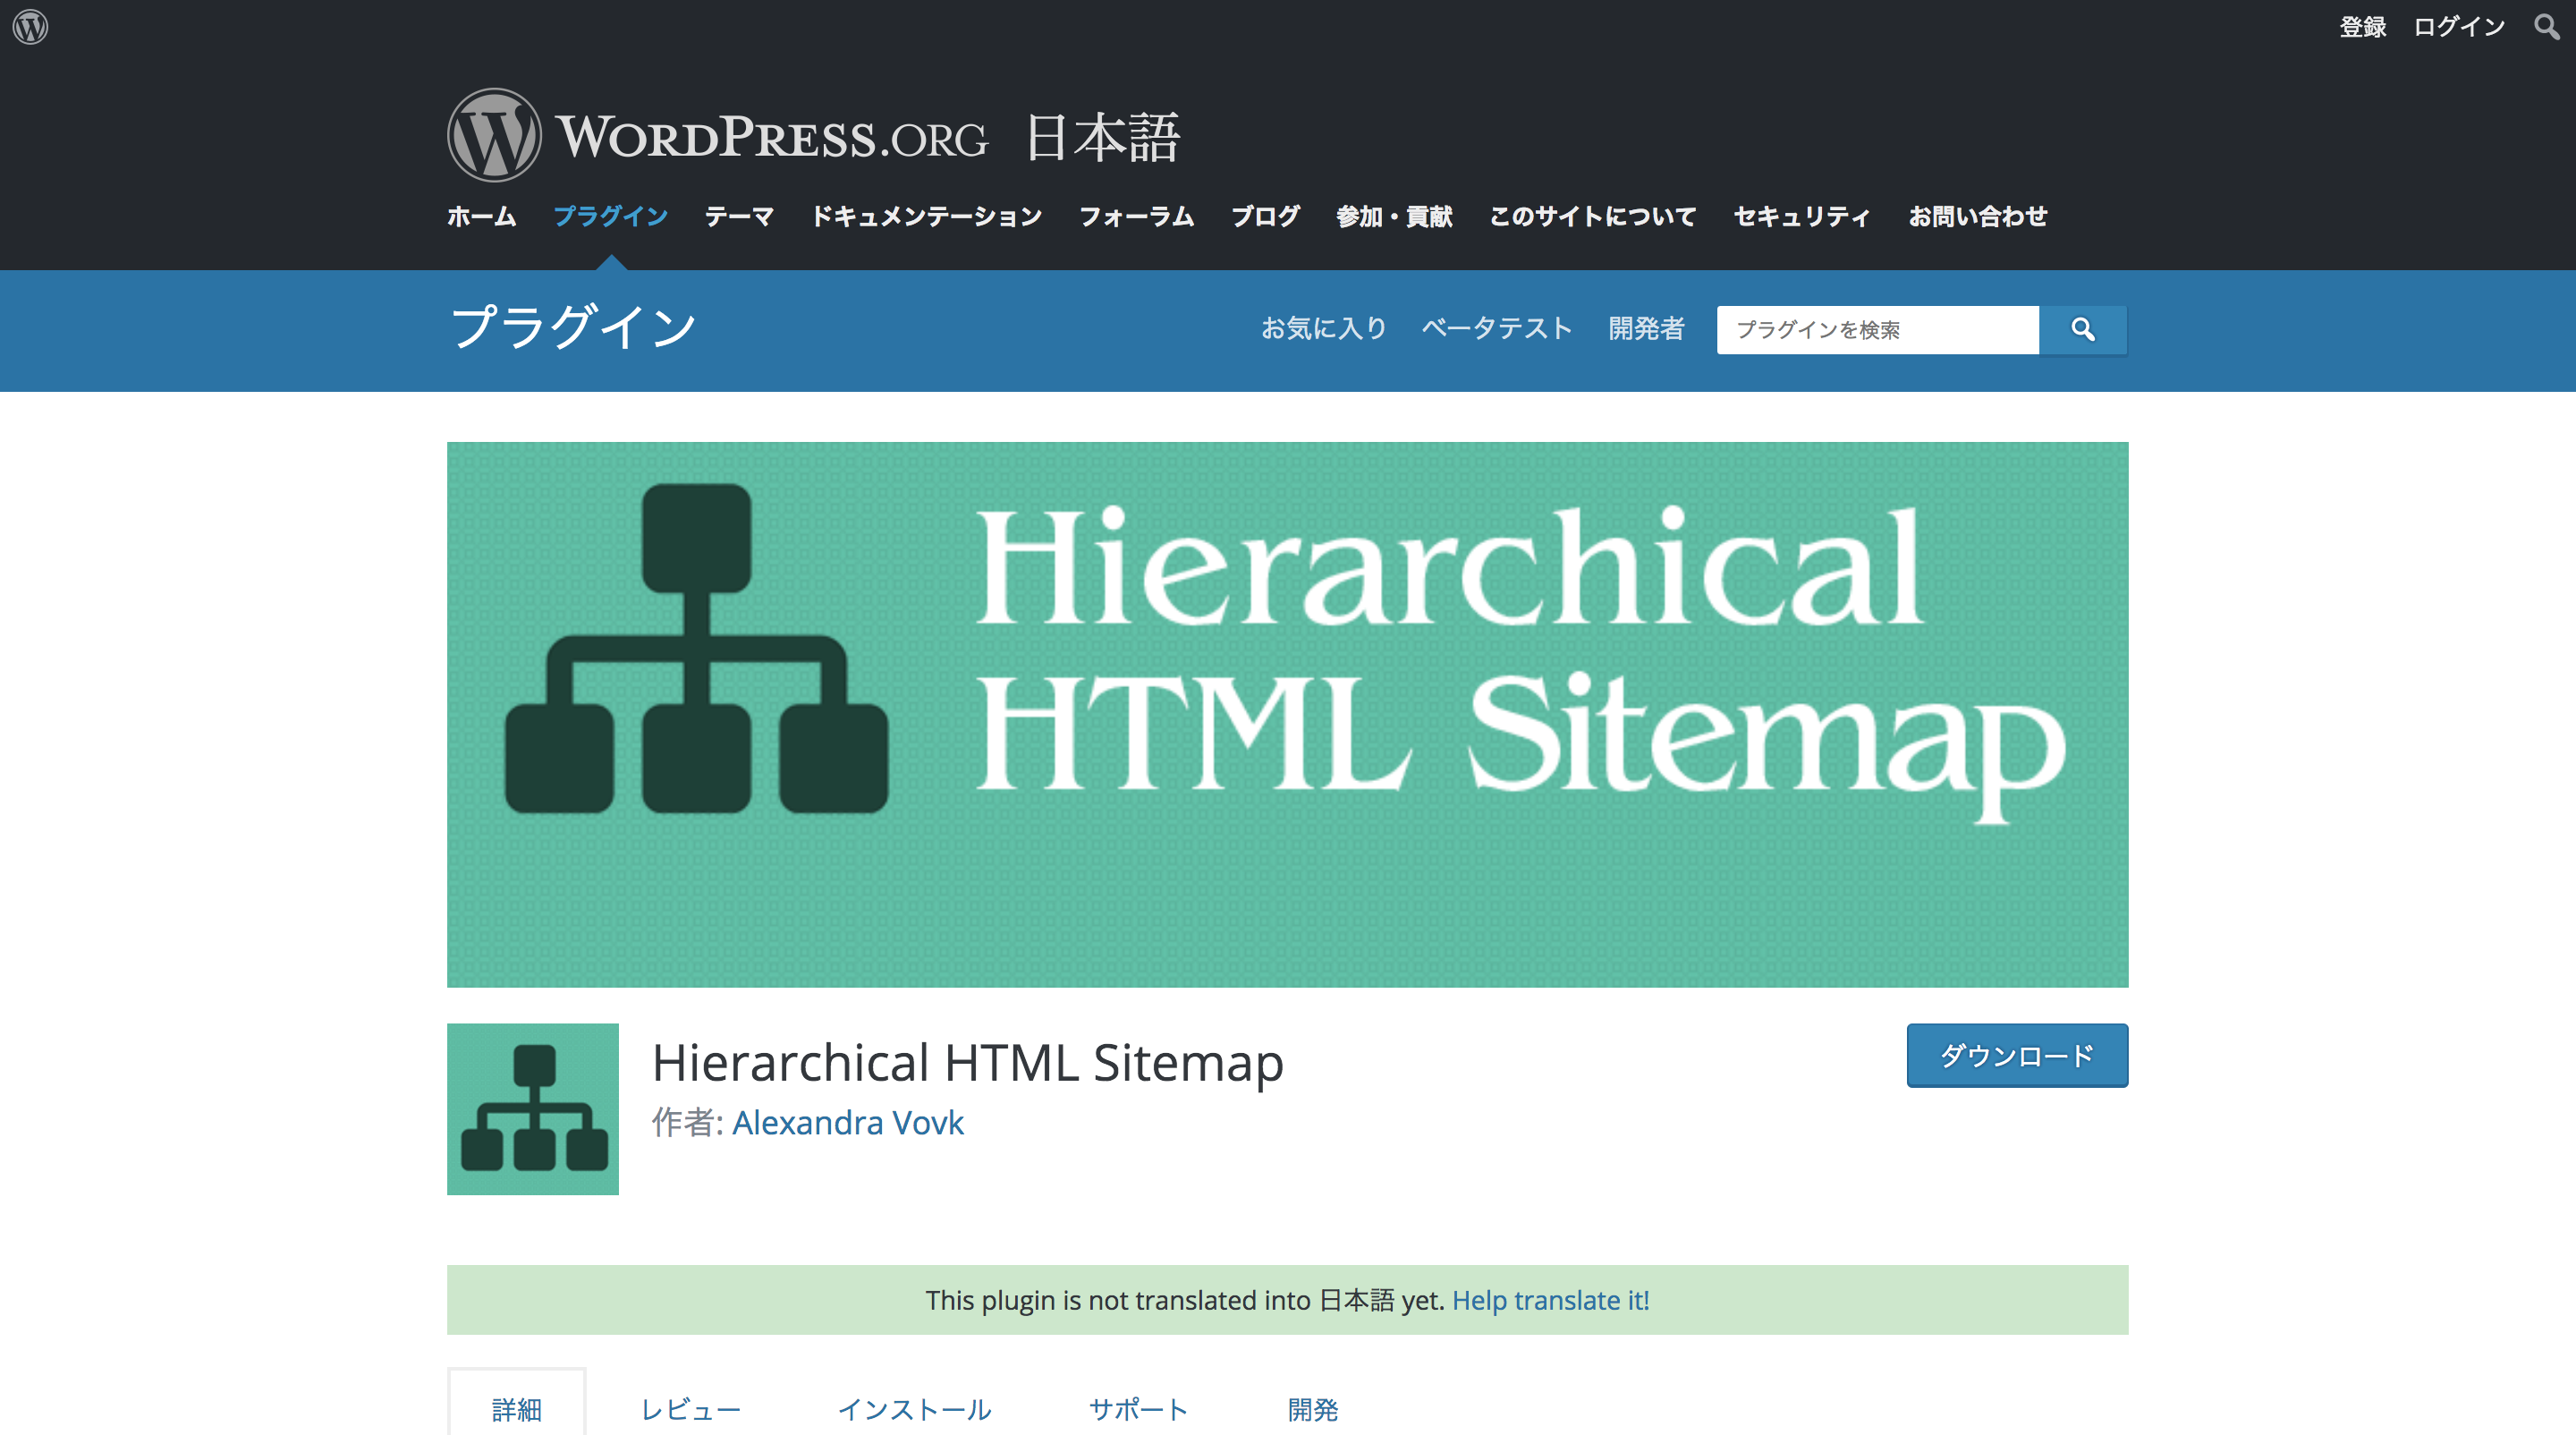 Hierarchical HTML Sitemap